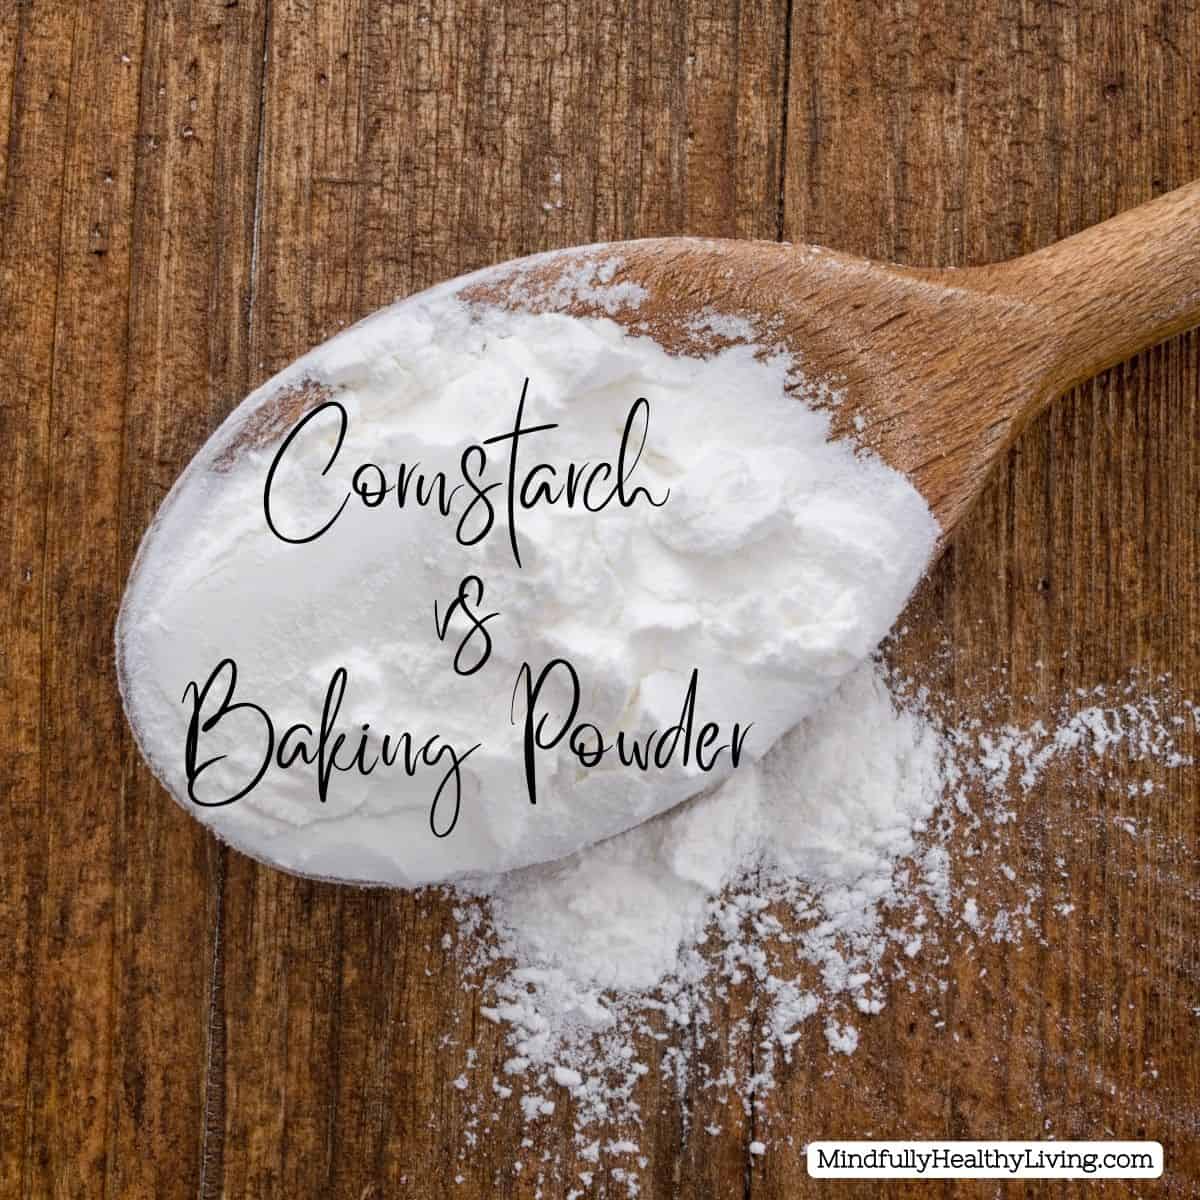 A wooden spoon overflowing with white powder on a wooden surface, with the text "Cornstarch & Baking Powder."